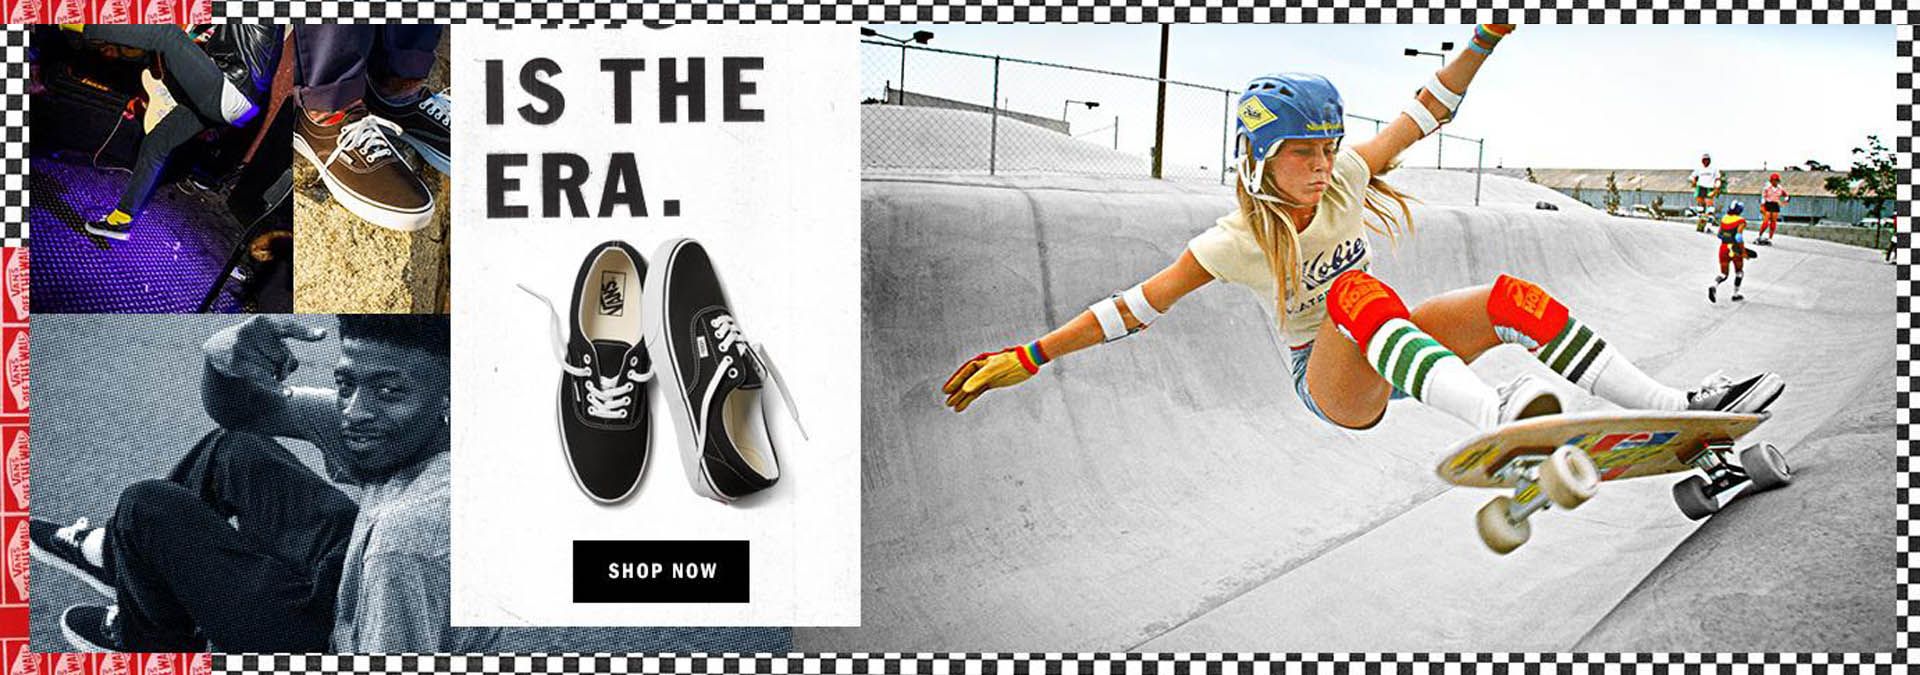 vans official page